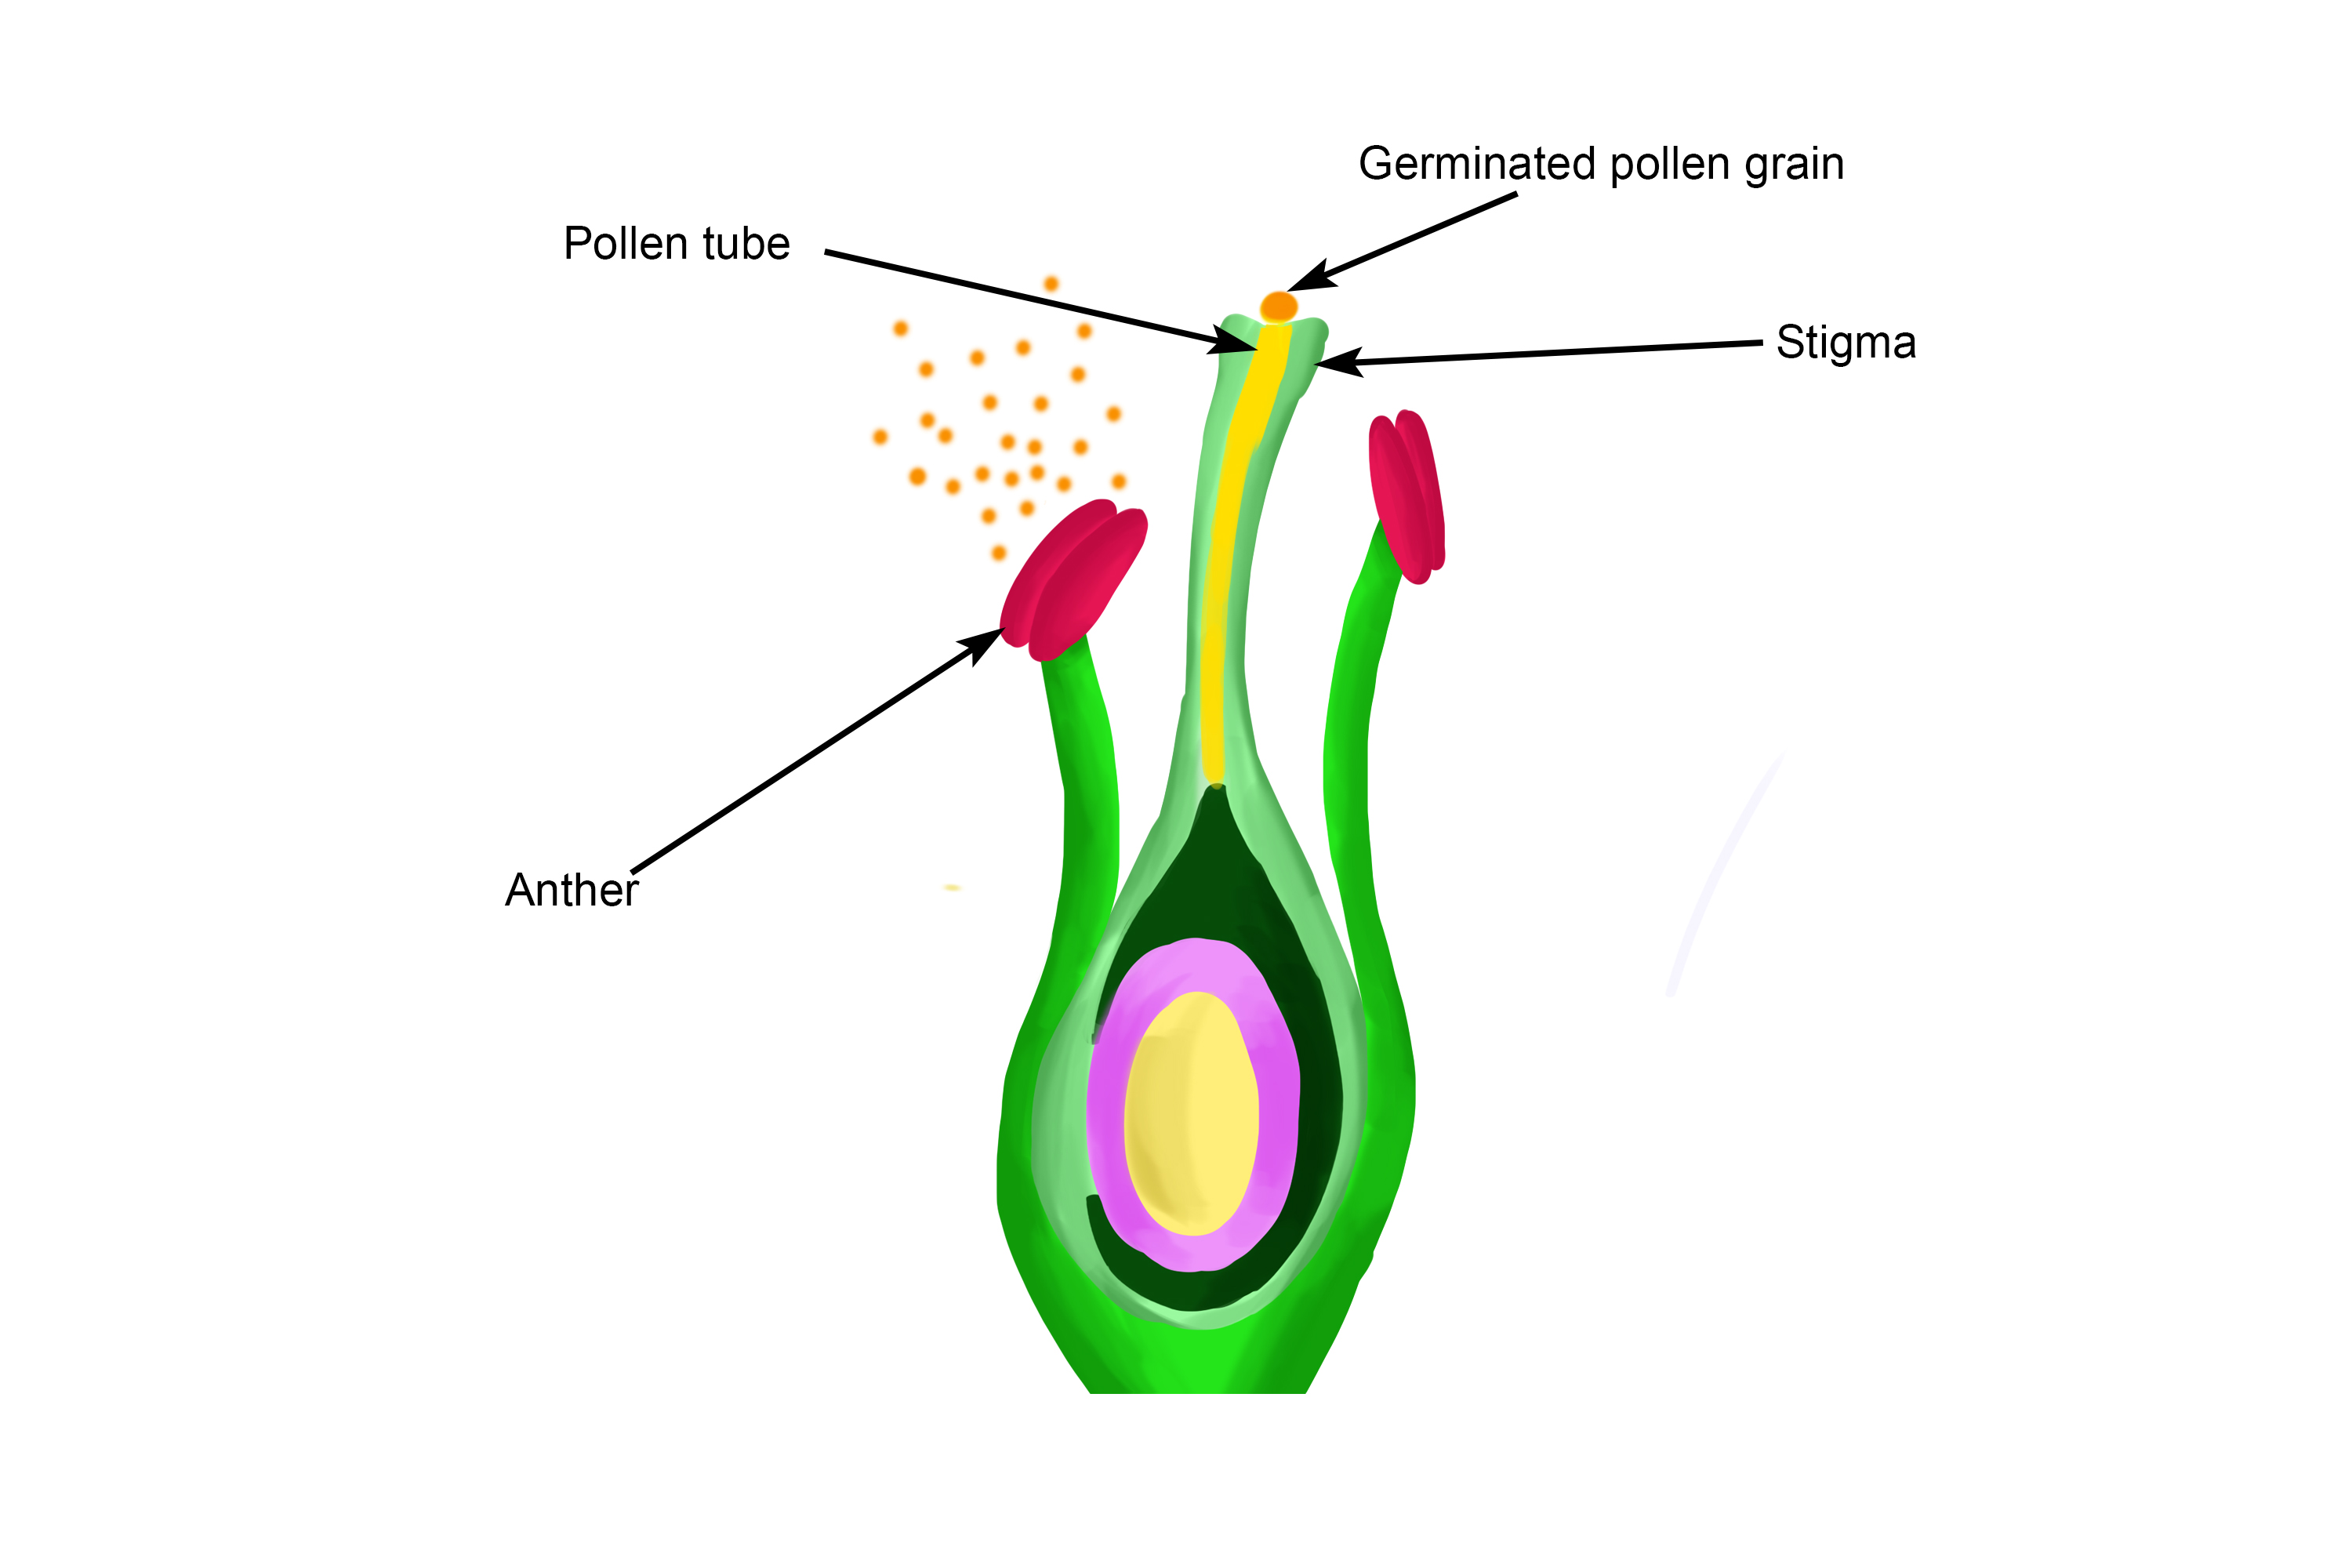 The pollen tube grows down from the stigma into the style